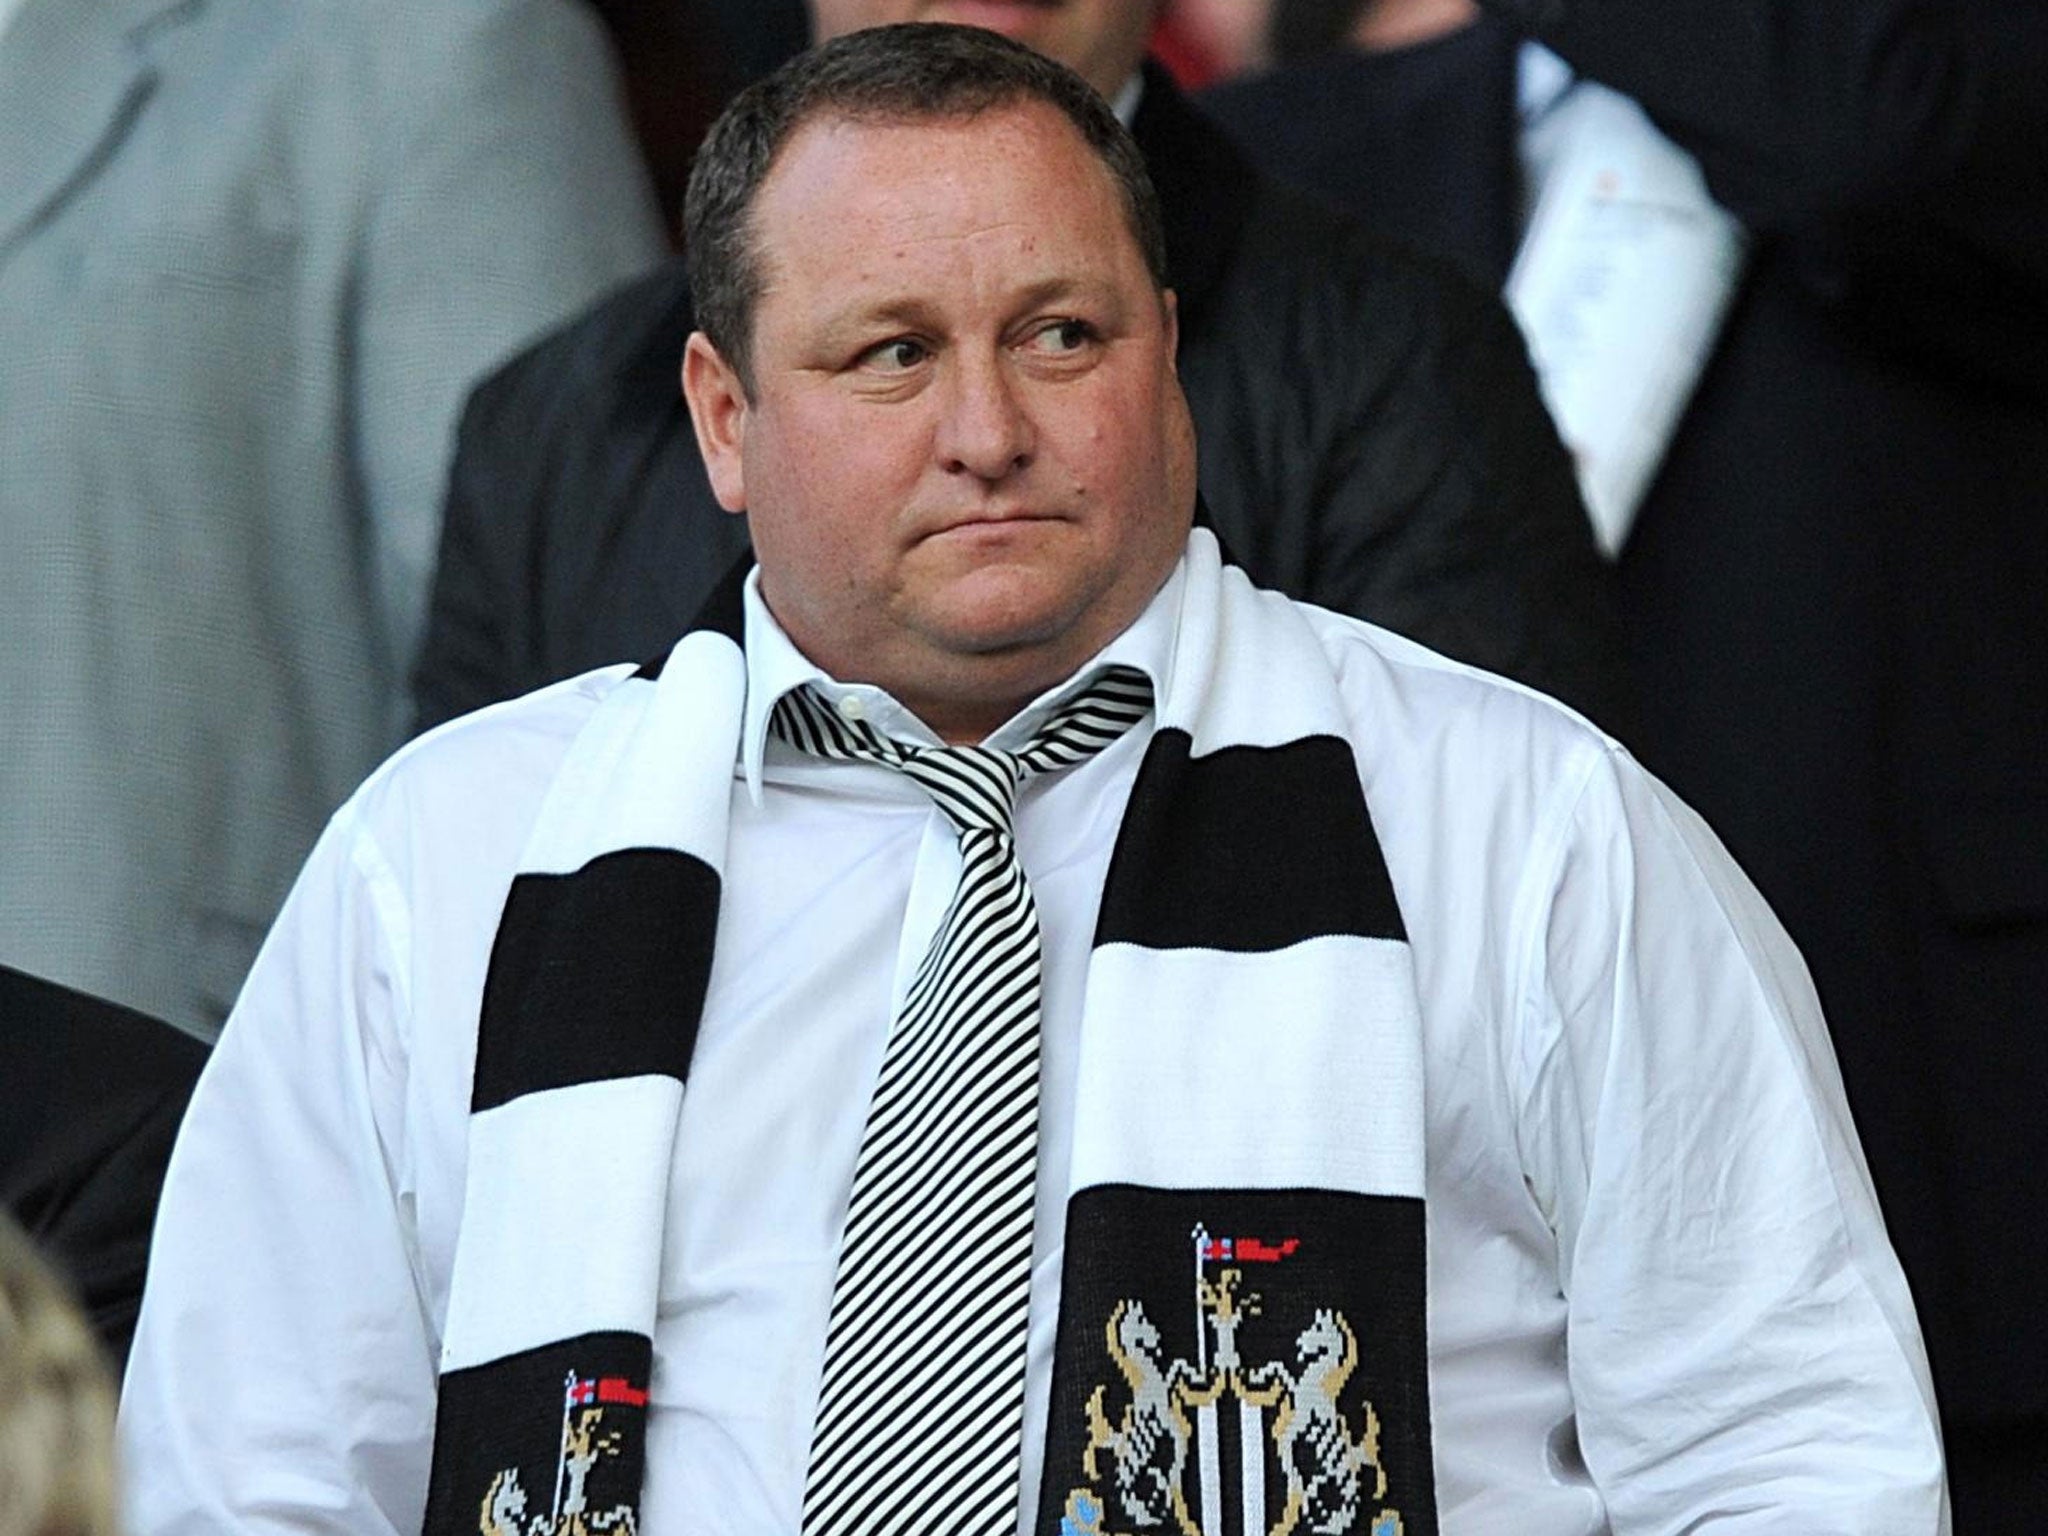 Mike Ashley will share a £200 million cash pot with an as-yet-unknown number of employees